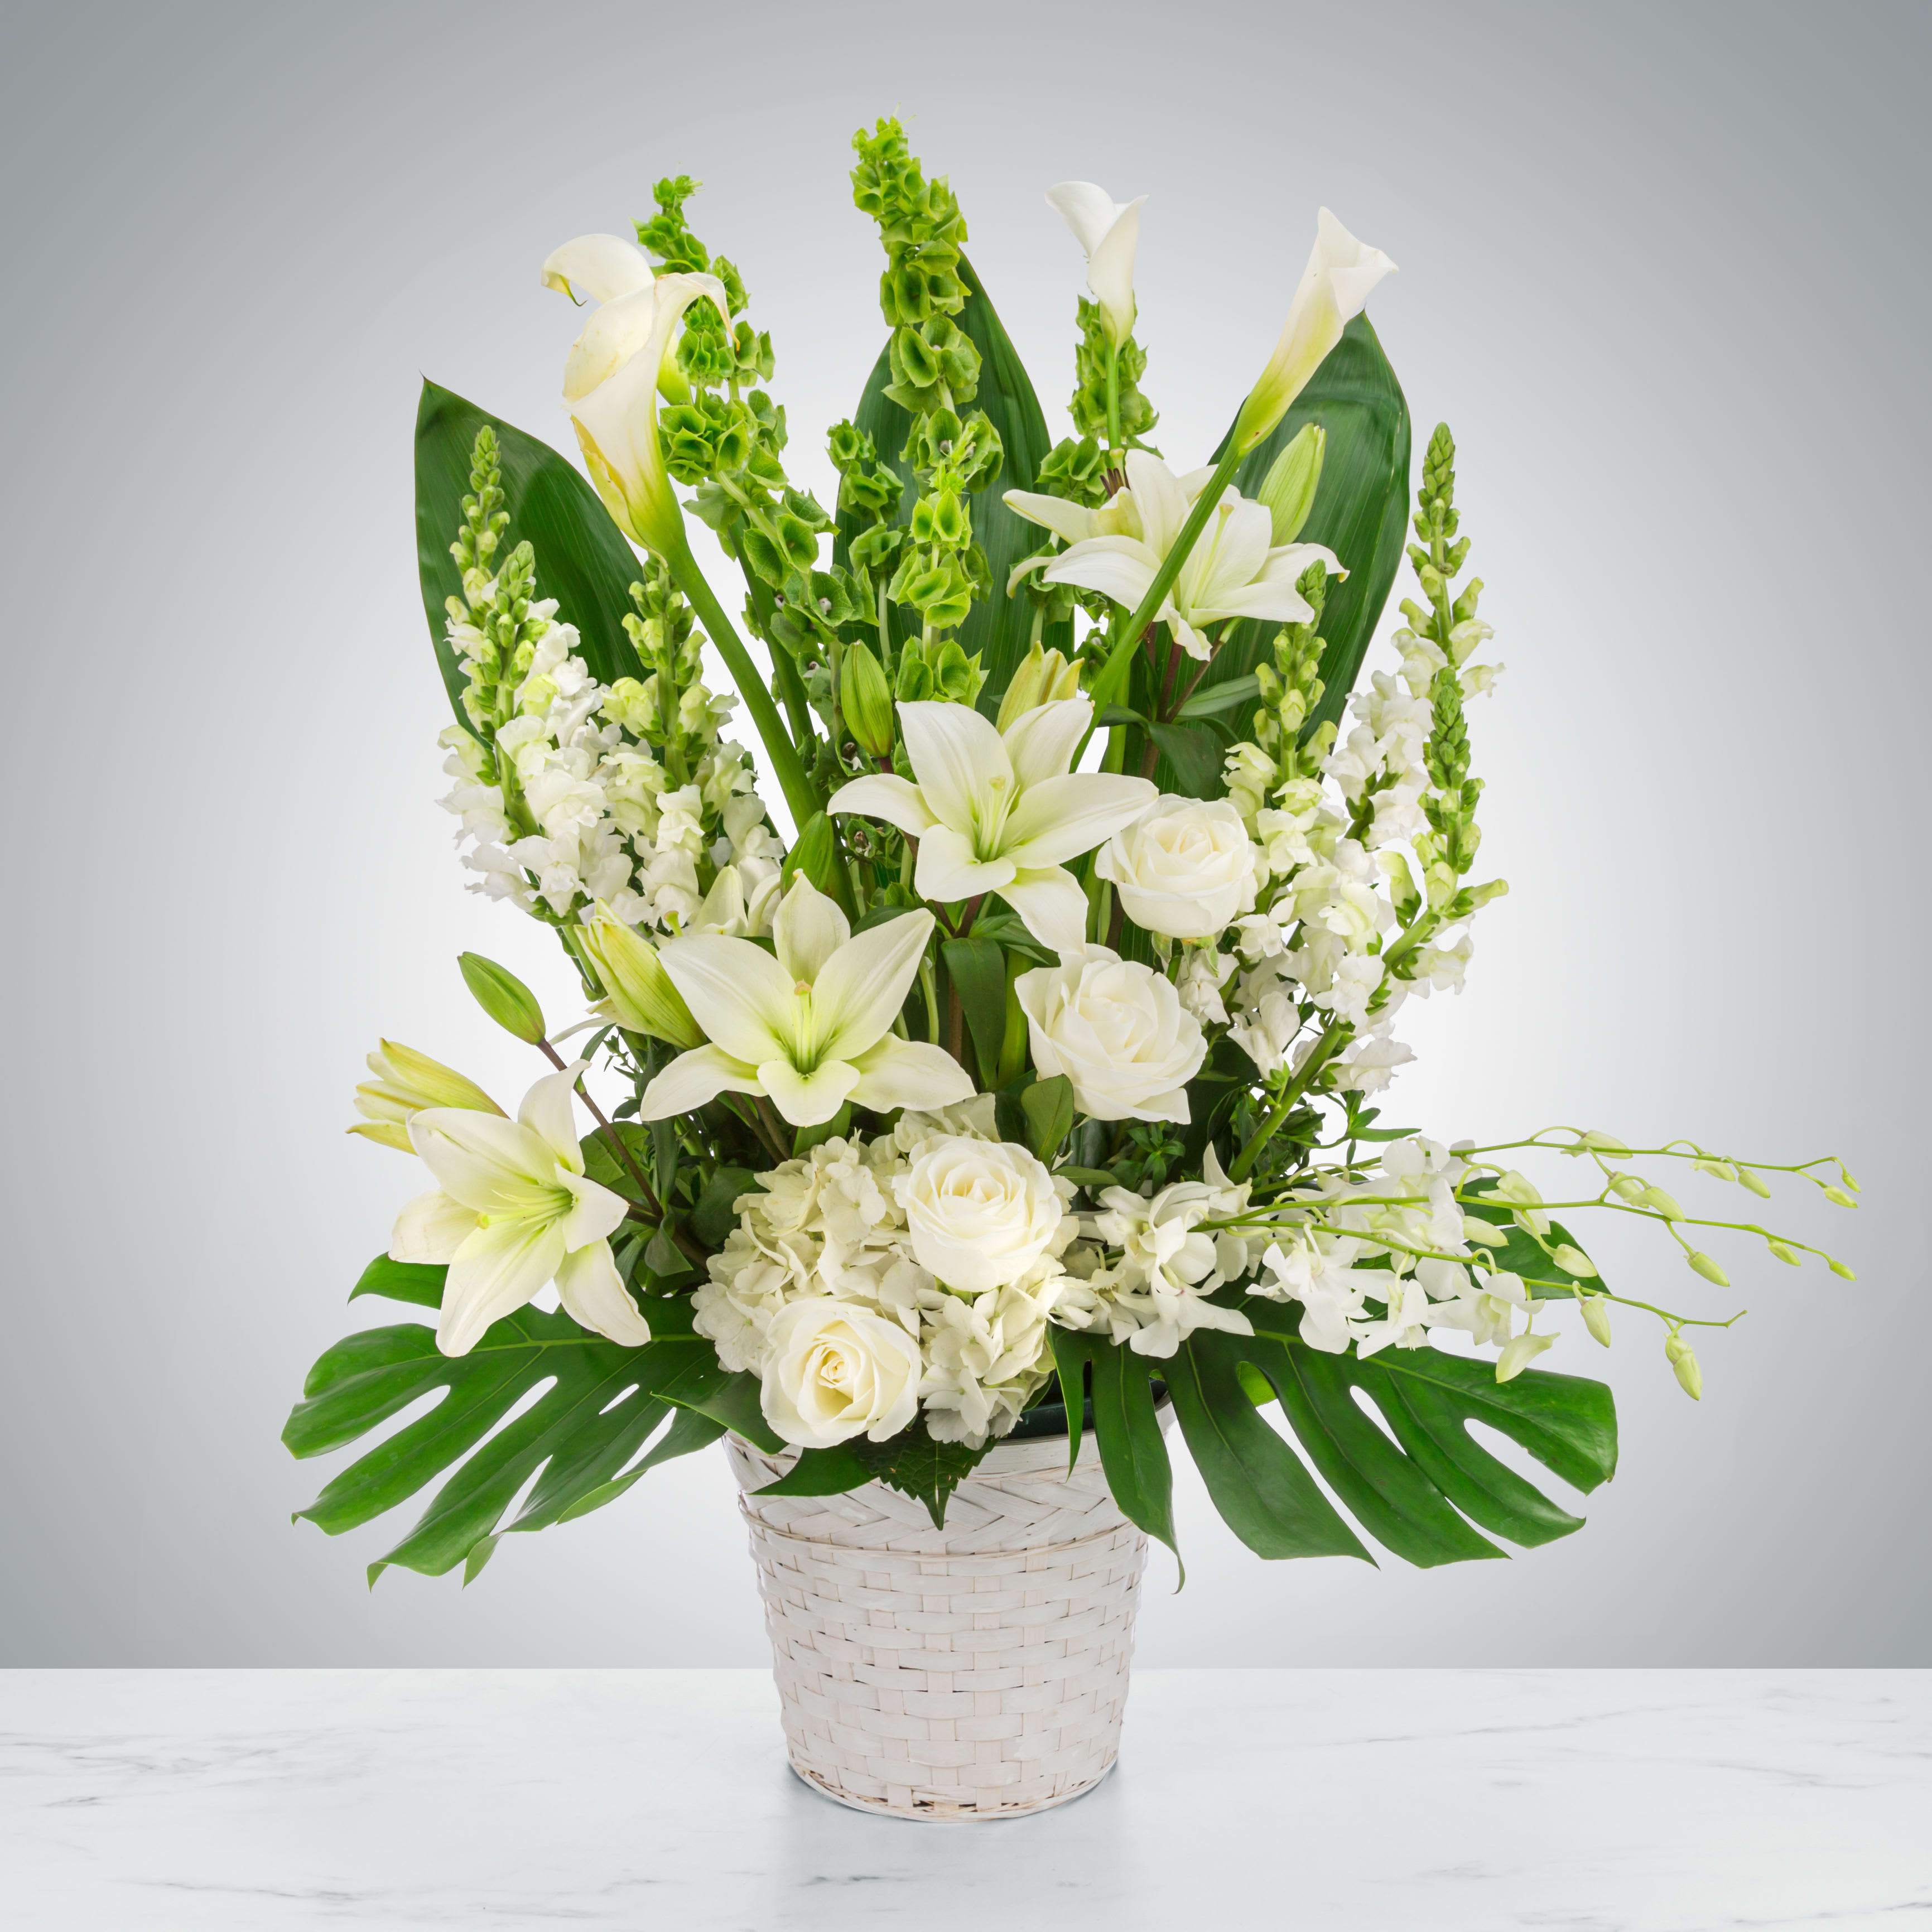 Hope by BloomNation™ - An all-white funeral basket featuring calla lilies, roses, delphinium orchids, and more framed by a backdrop of large leaves. Suitable for any type of funeral ceremony 